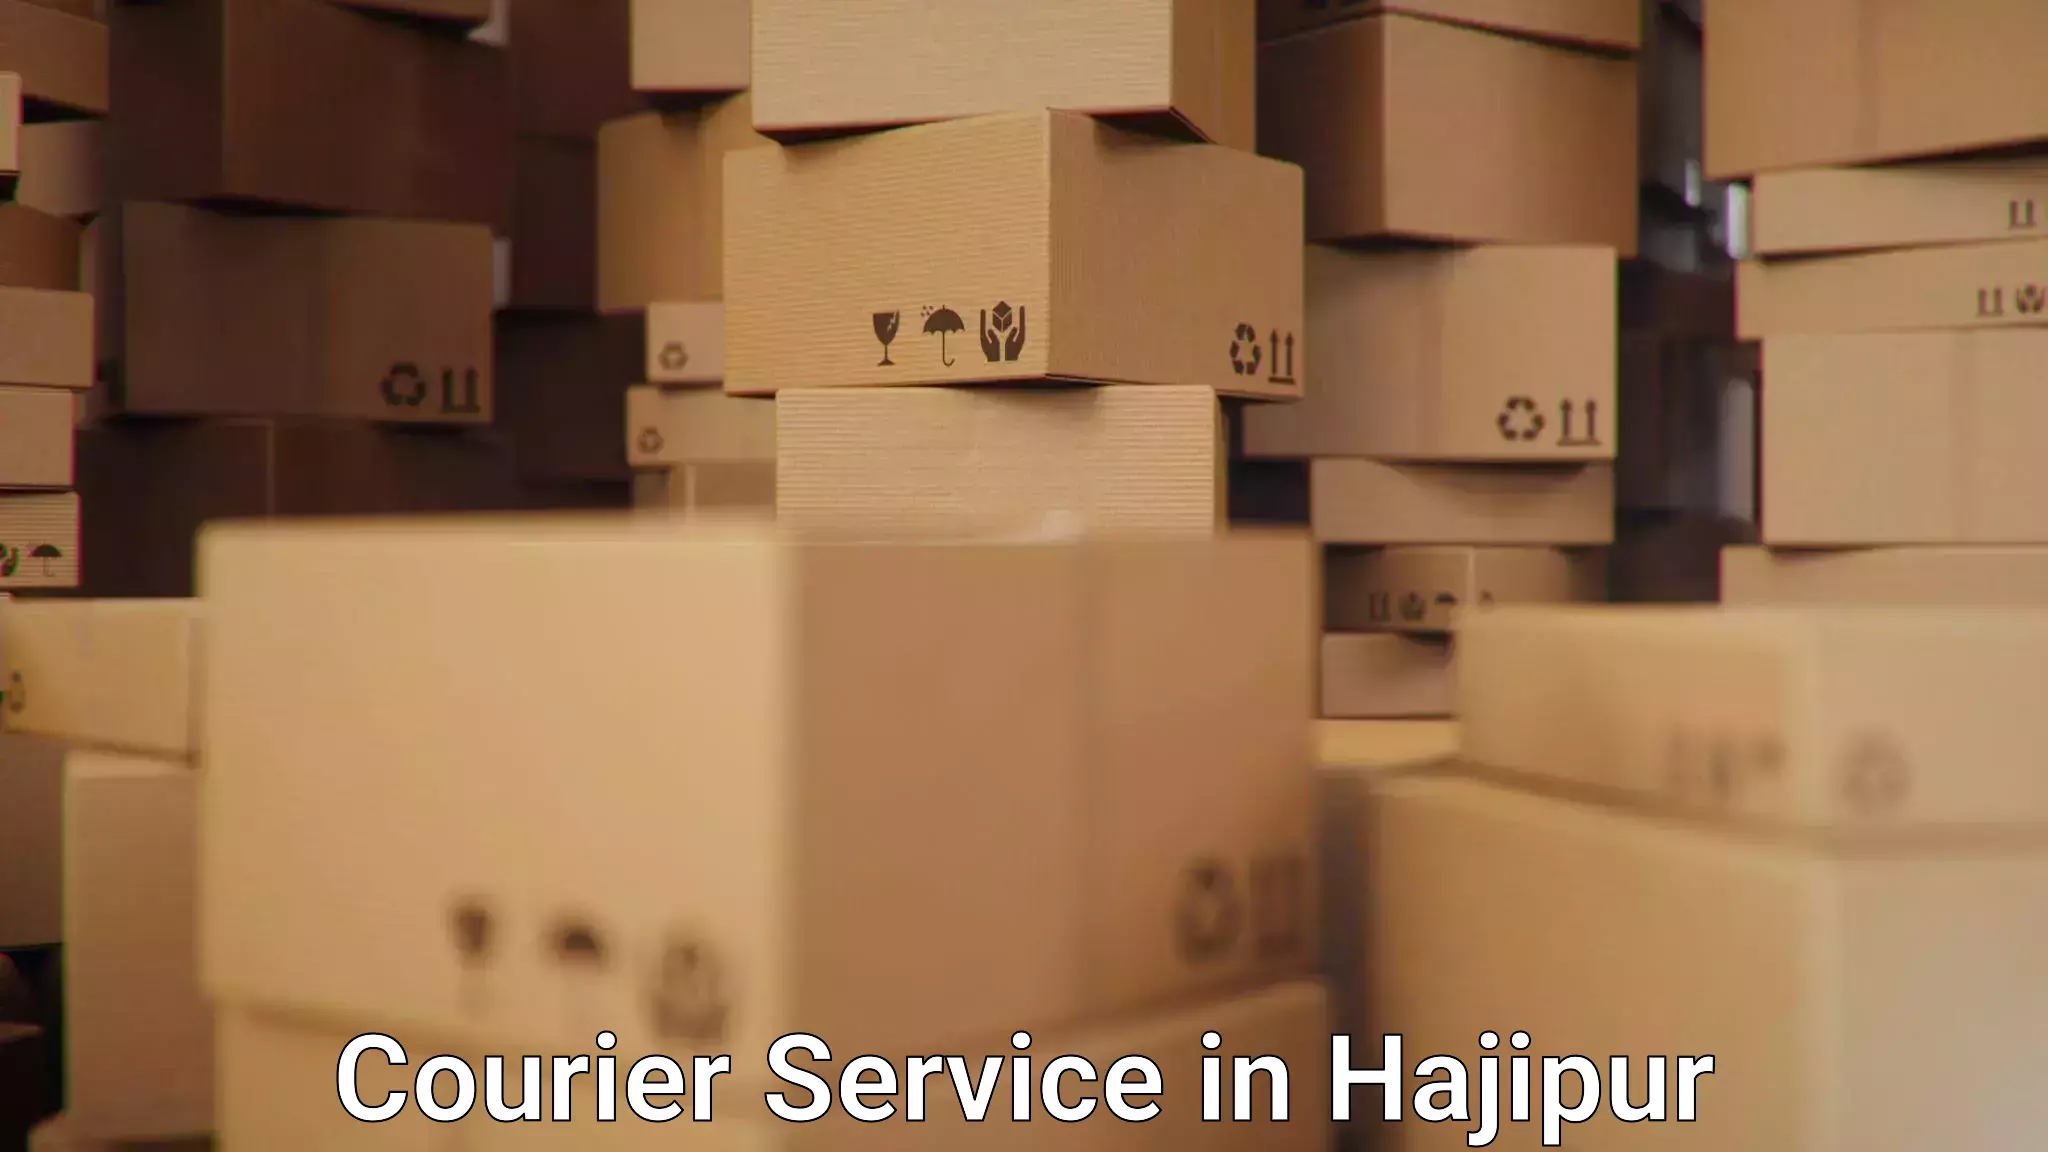 Fast shipping solutions in Hajipur